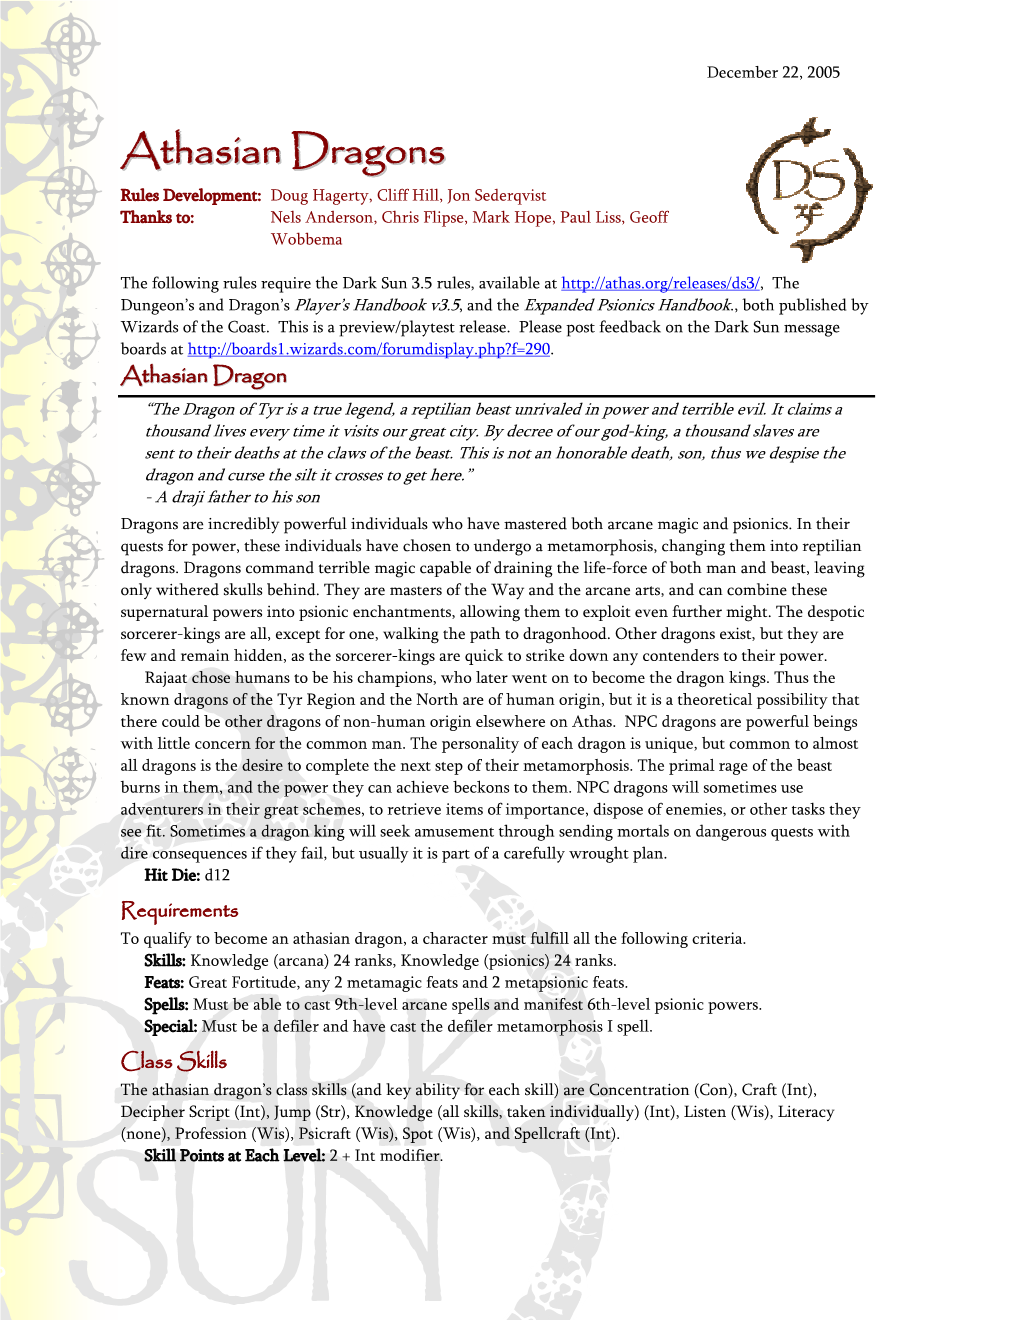 Athasian Dragons – Release 3 December 22, 2005